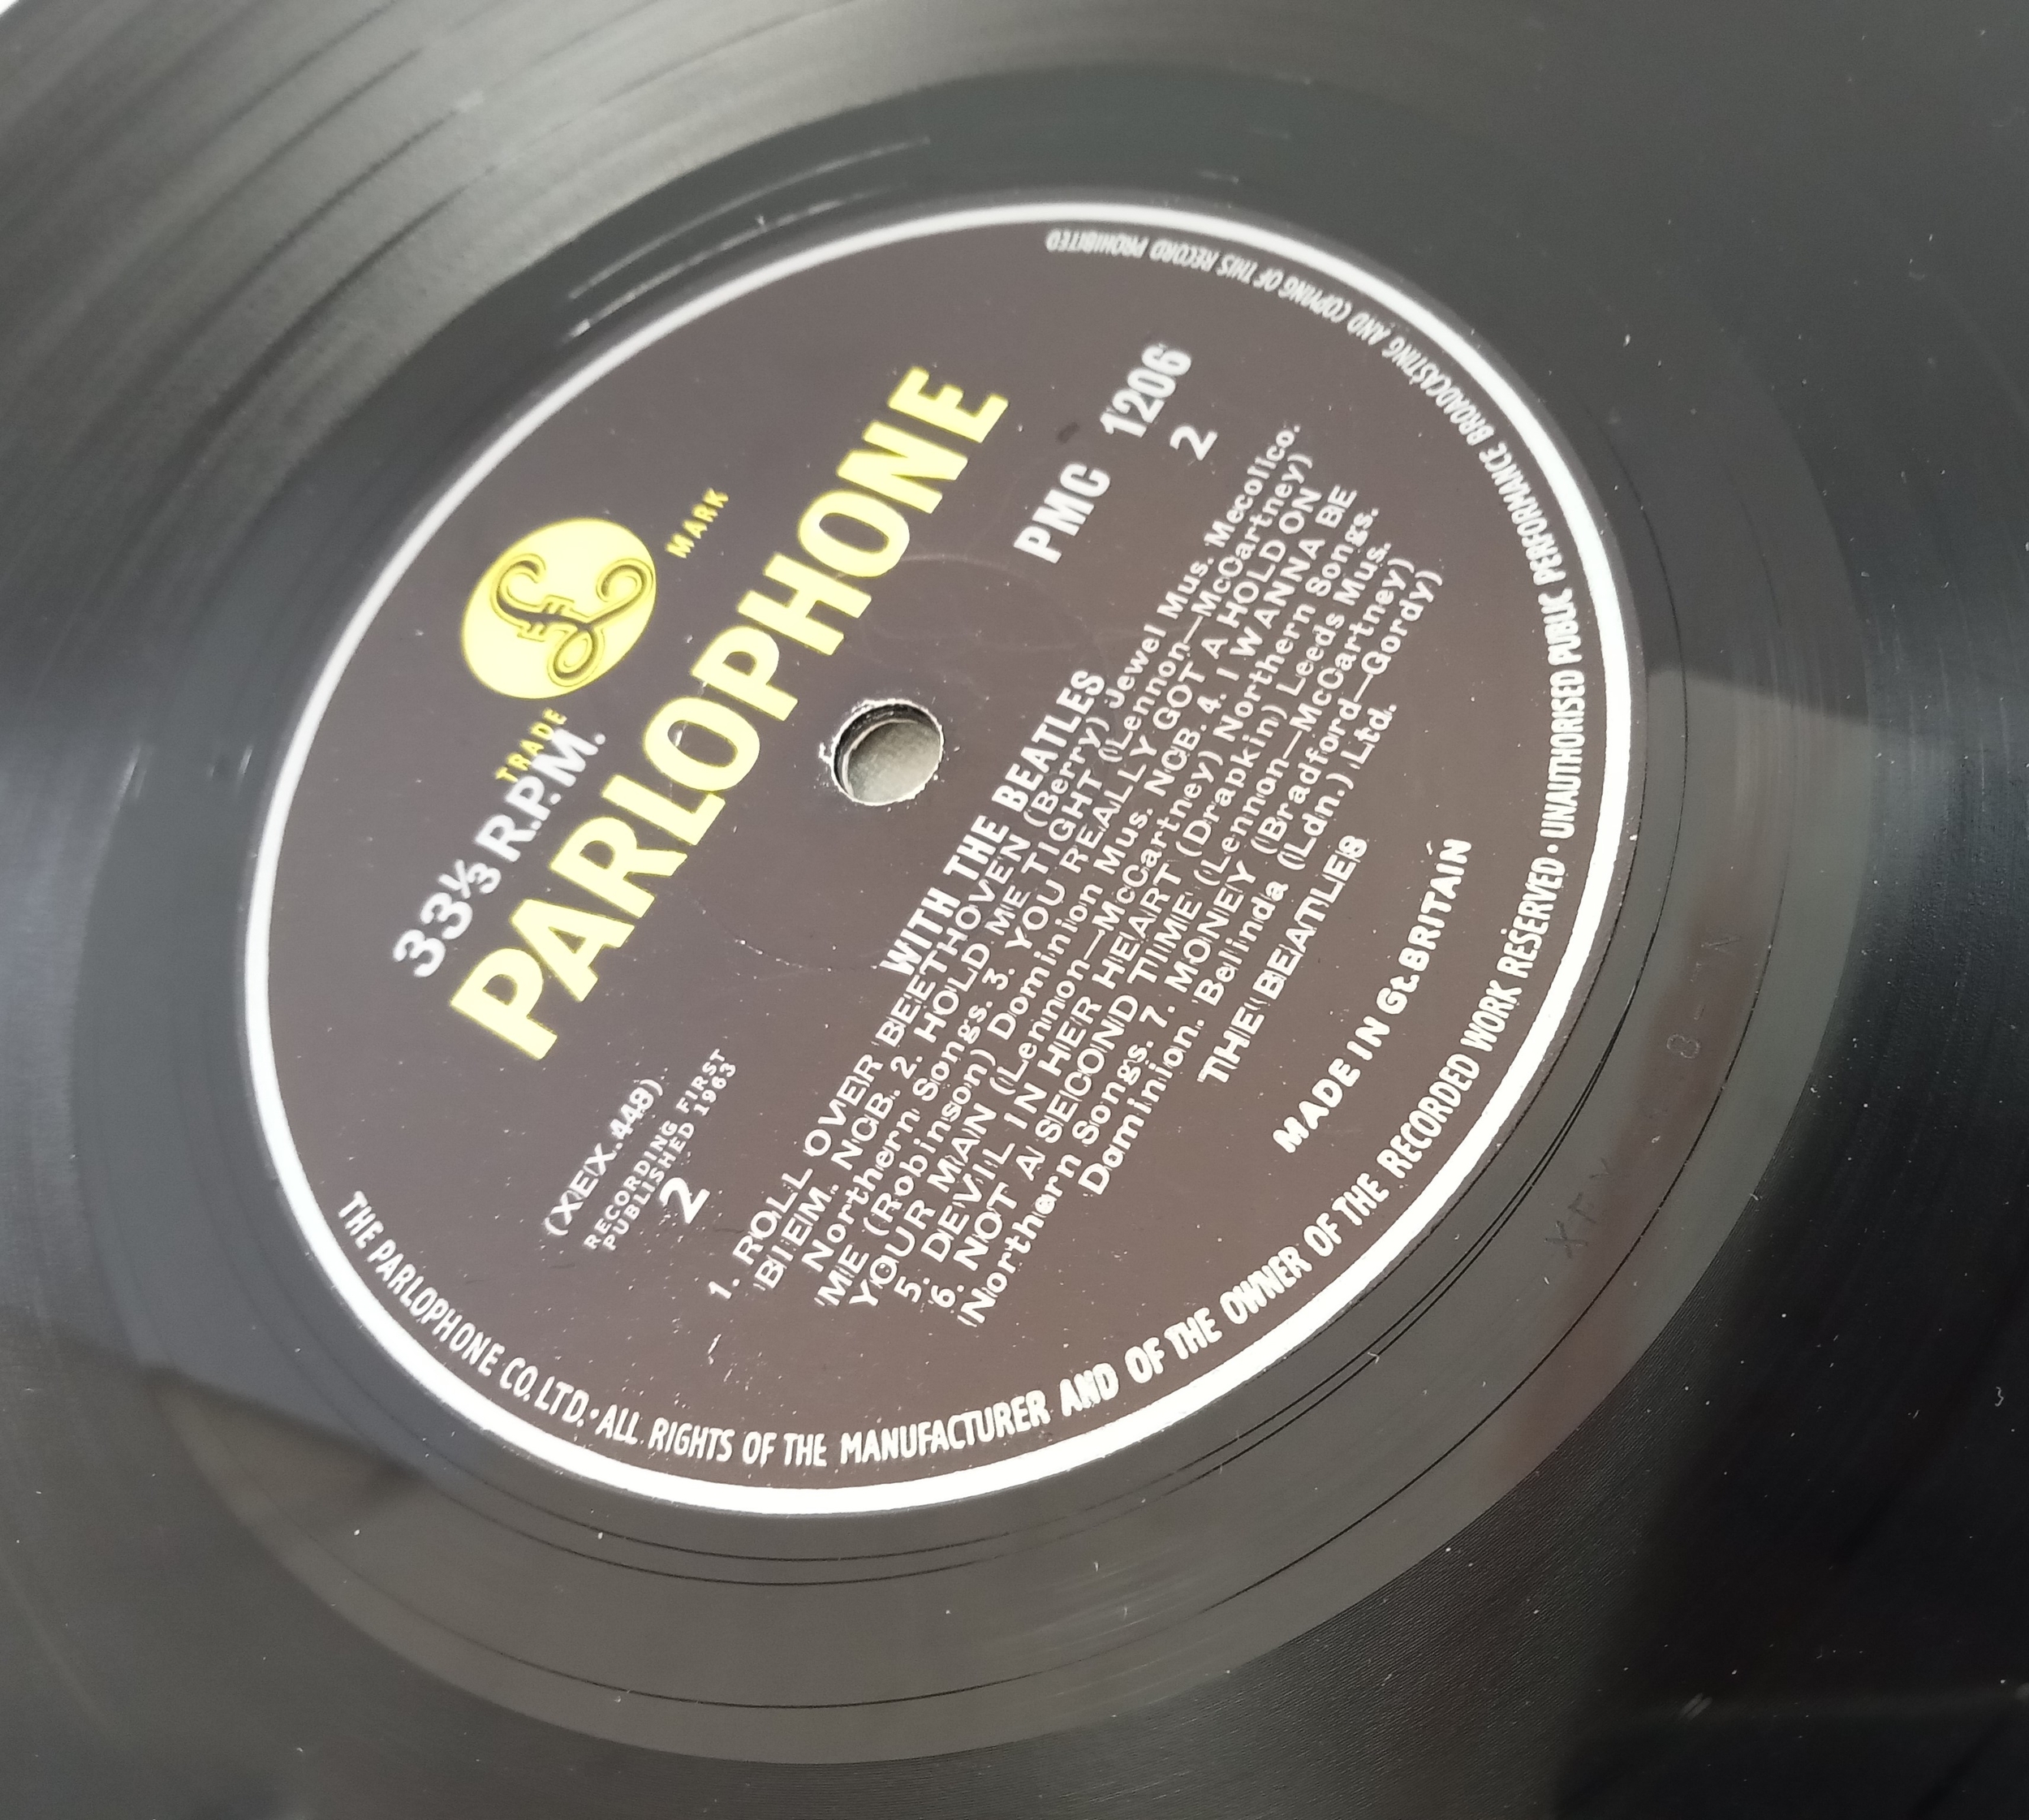 The Beatles For Sale PMC 1240 Mono Black & Yellow Parlophone UK First Pressing condition excellent & - Image 8 of 8